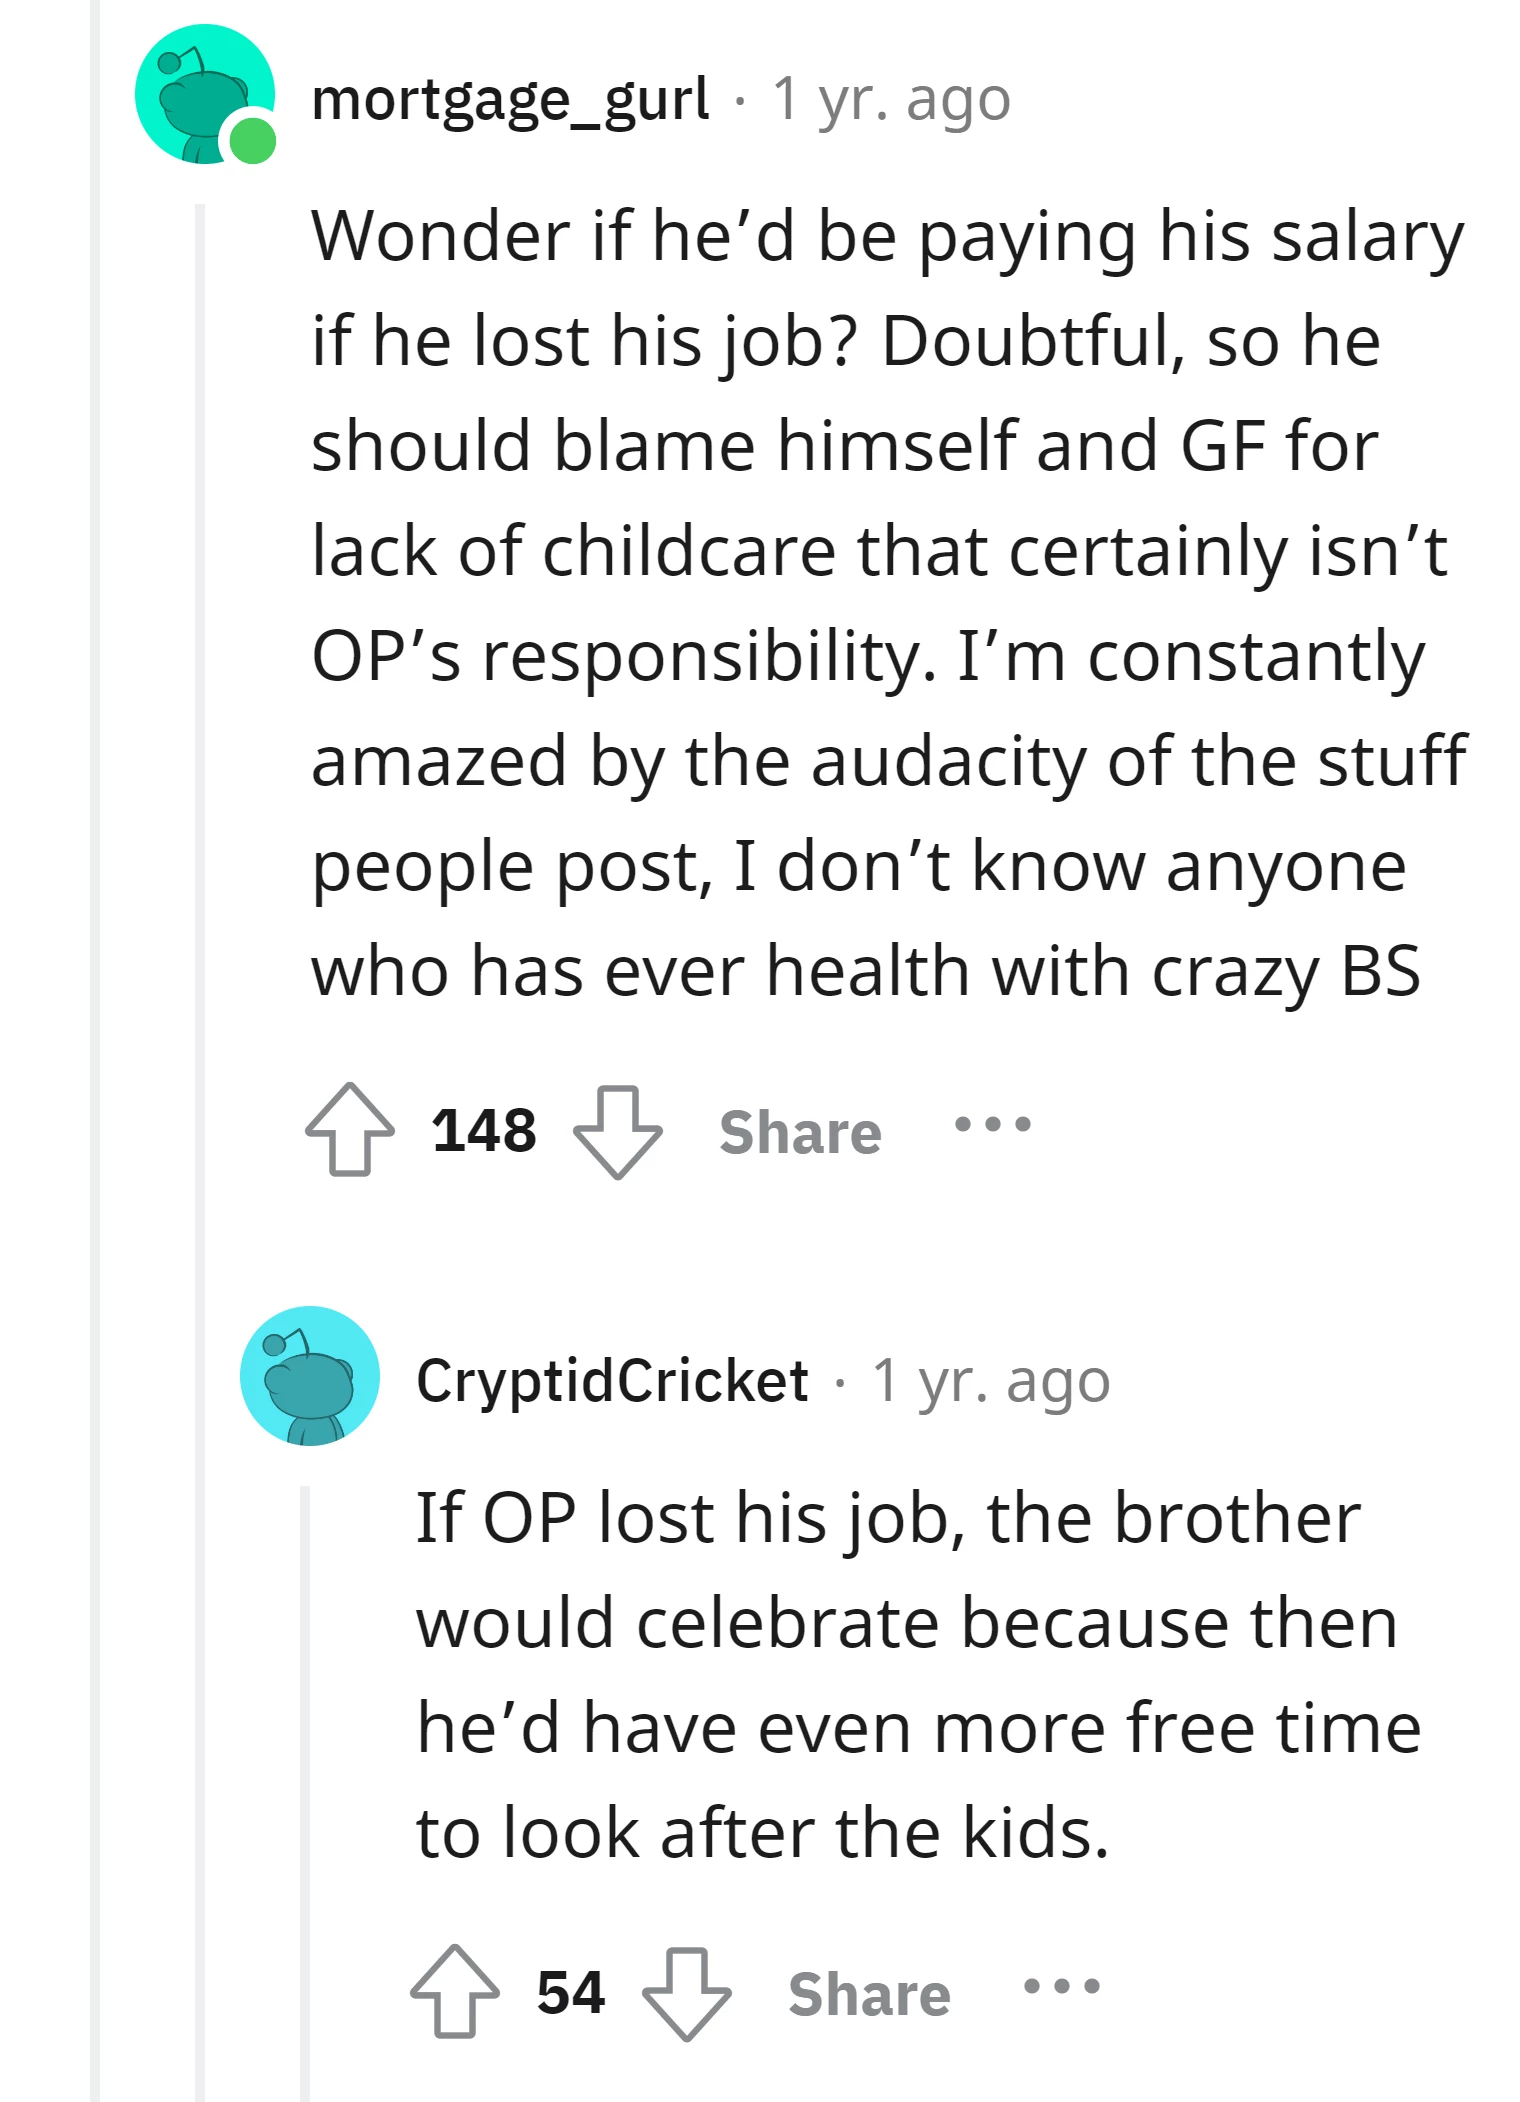 Commenter questions if the brother would financially support the OP if they lost their job